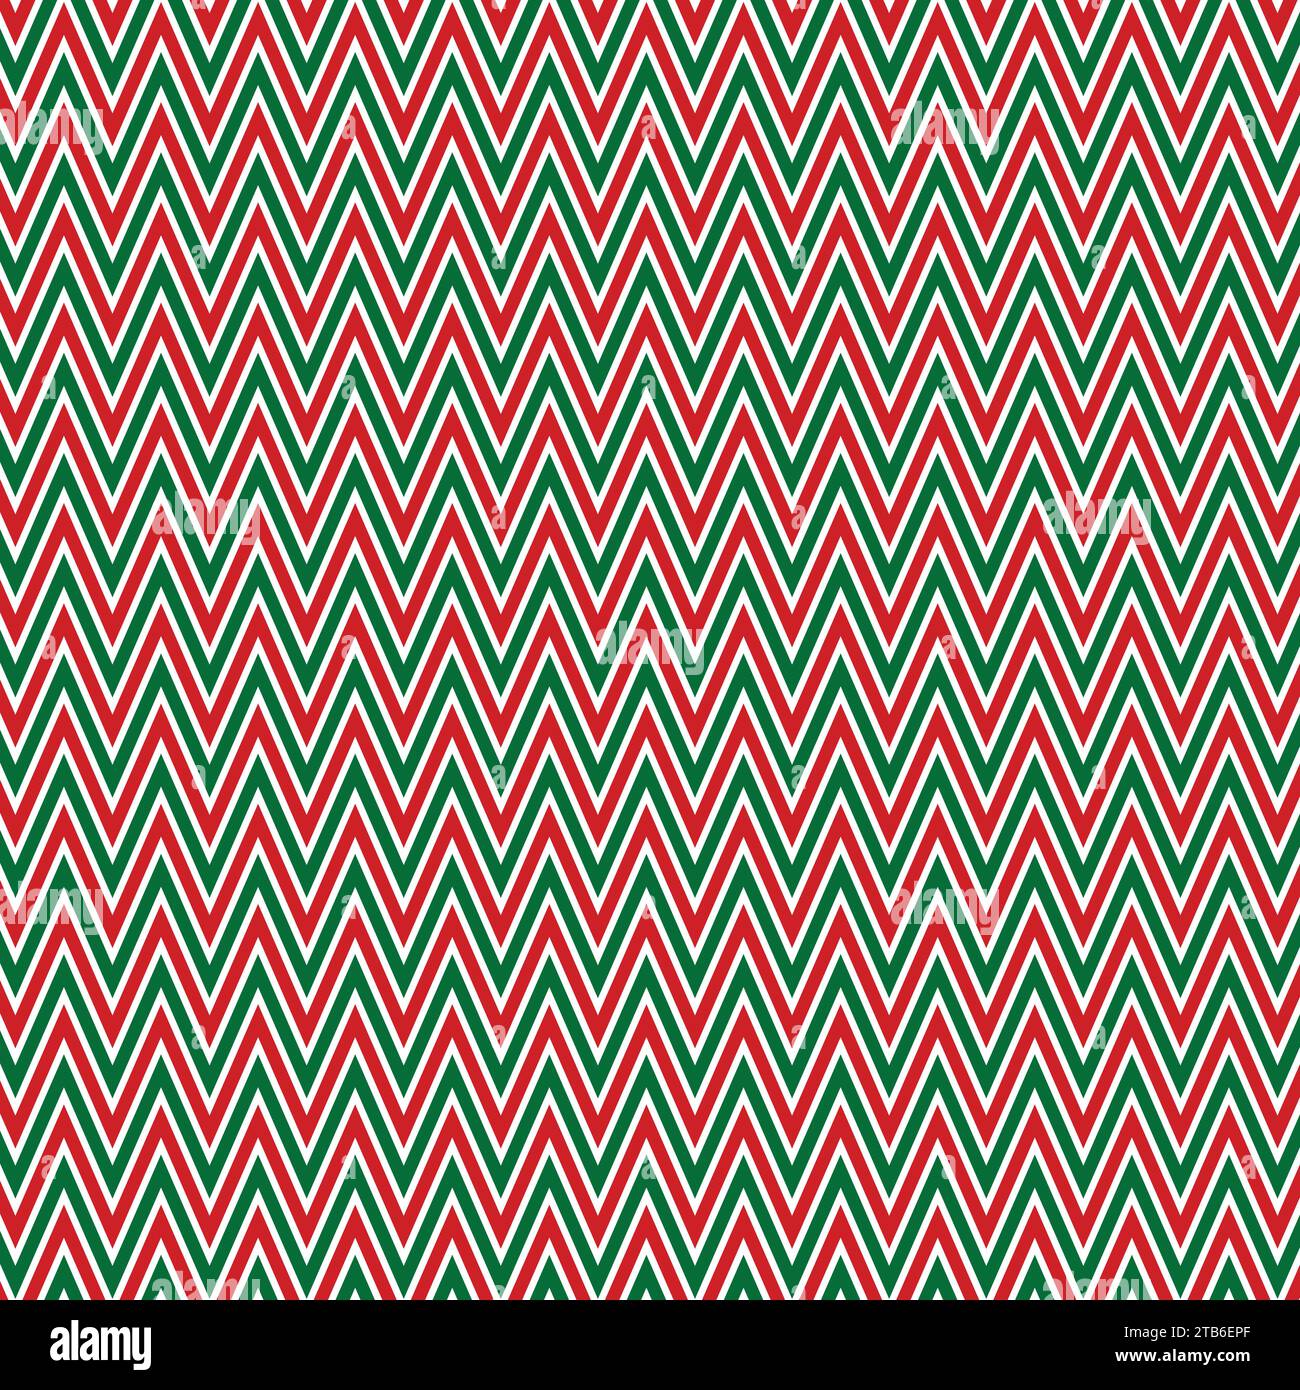 Christmas pattern chevron design wallpaper. Red, green and white color zigzag pattern. Stock Vector